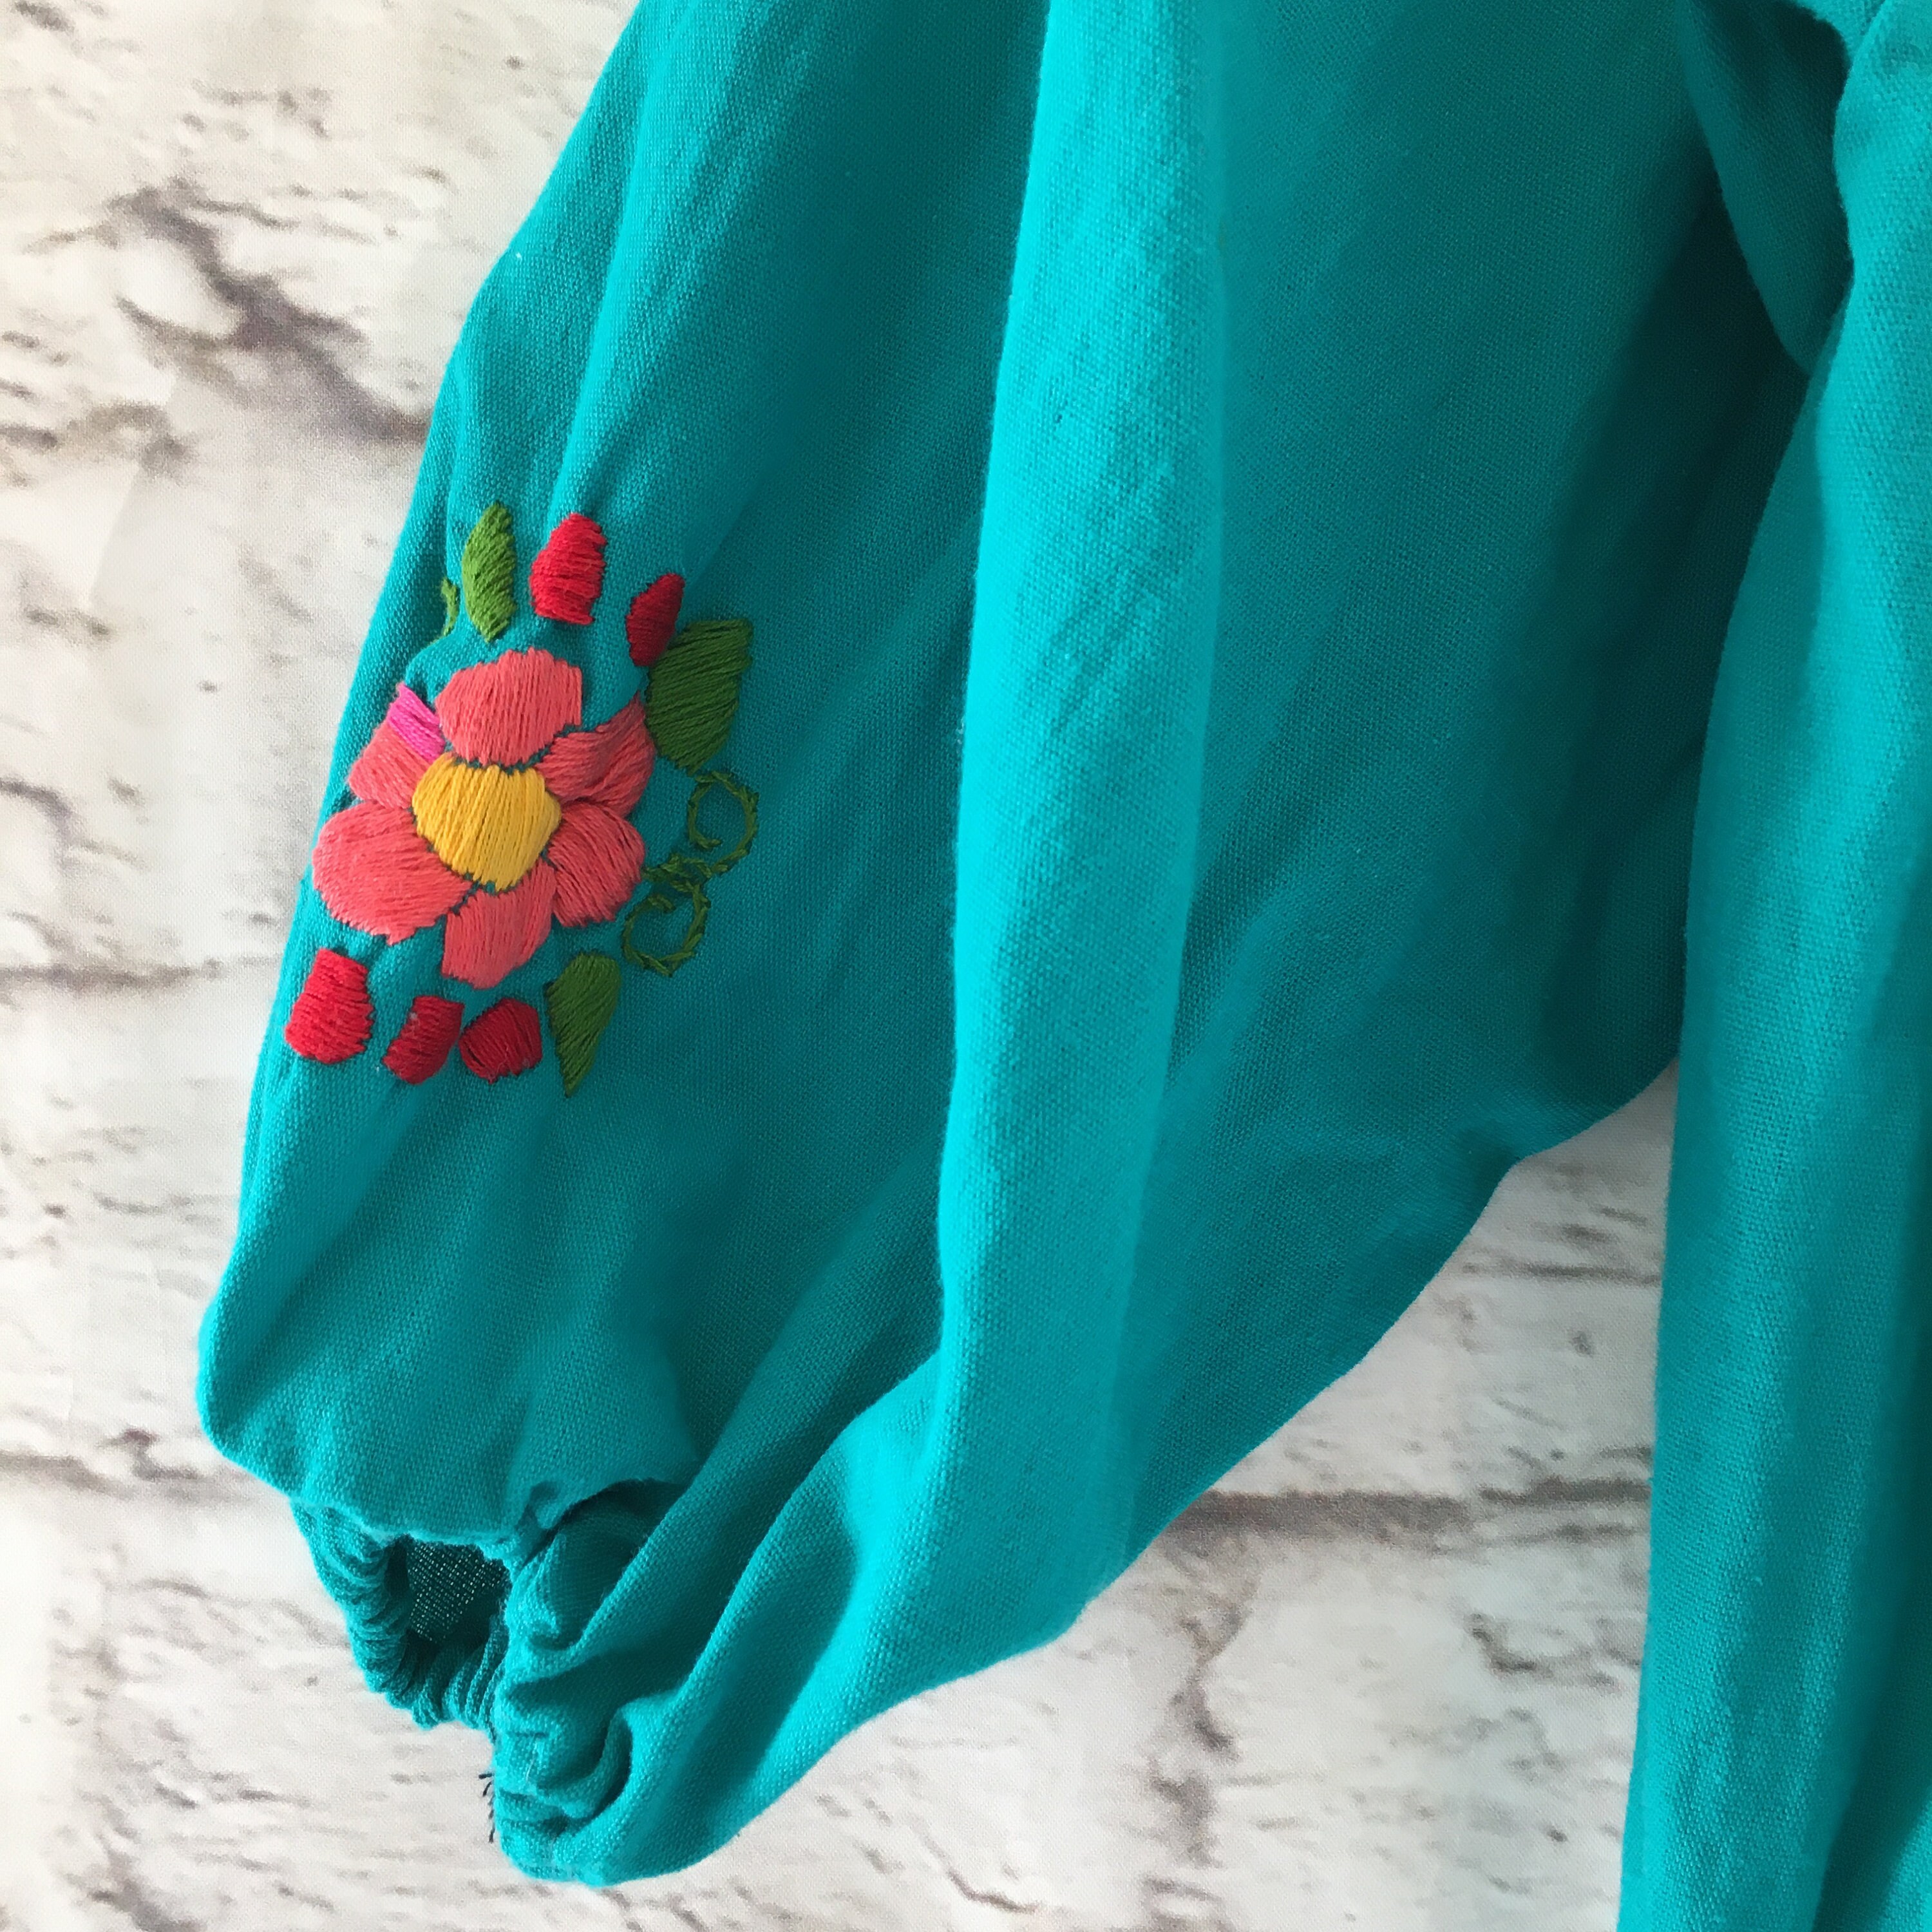 Women's Handmade Floral Embroidered Teal Green Mexican | Etsy